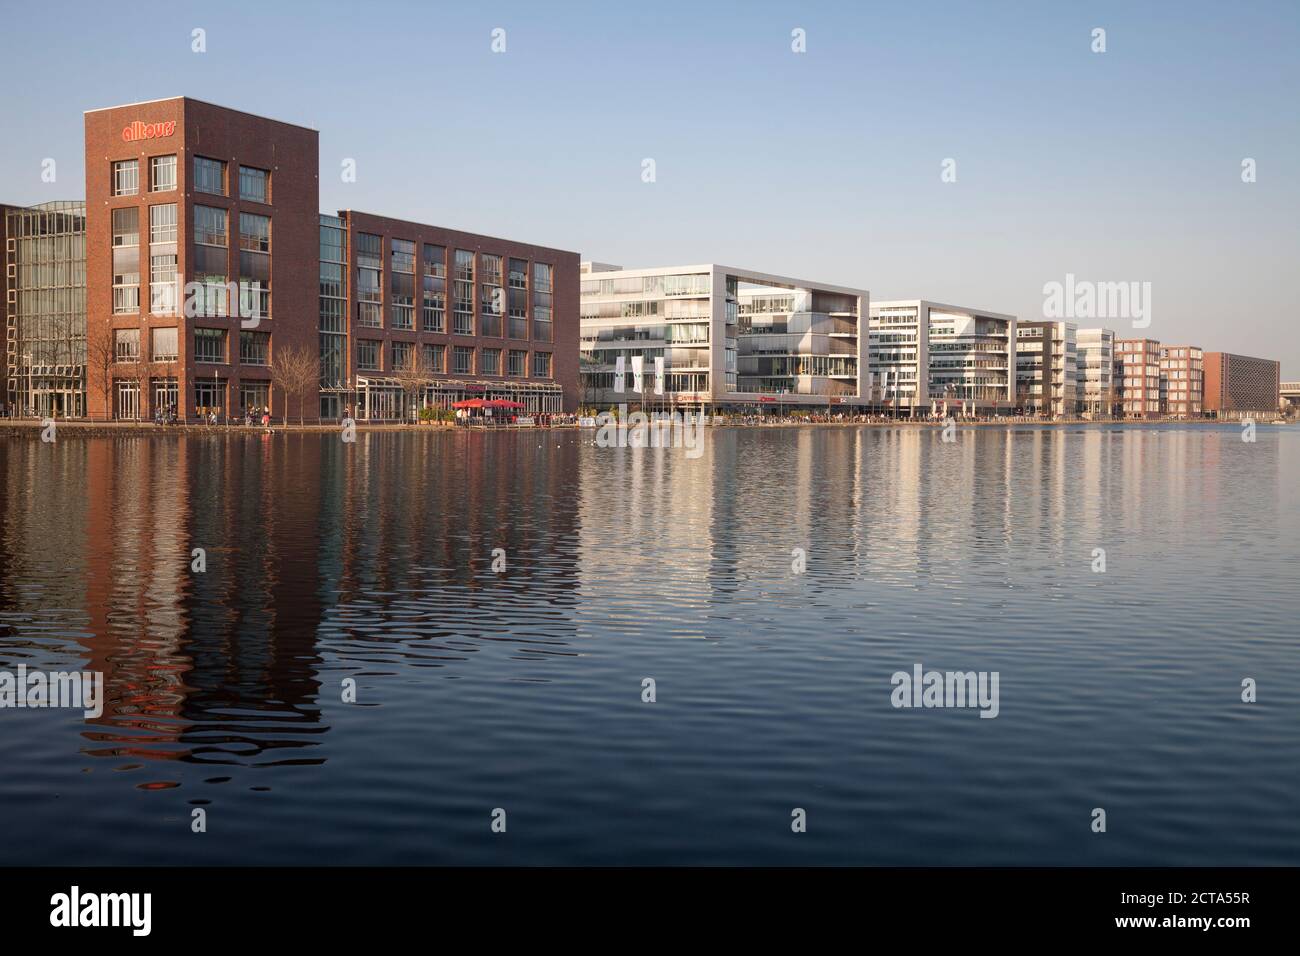 Germany, North Rhine-Westphalia, Duisburg, inner harbour, view to office buildings and outdoor gastronomy Stock Photo